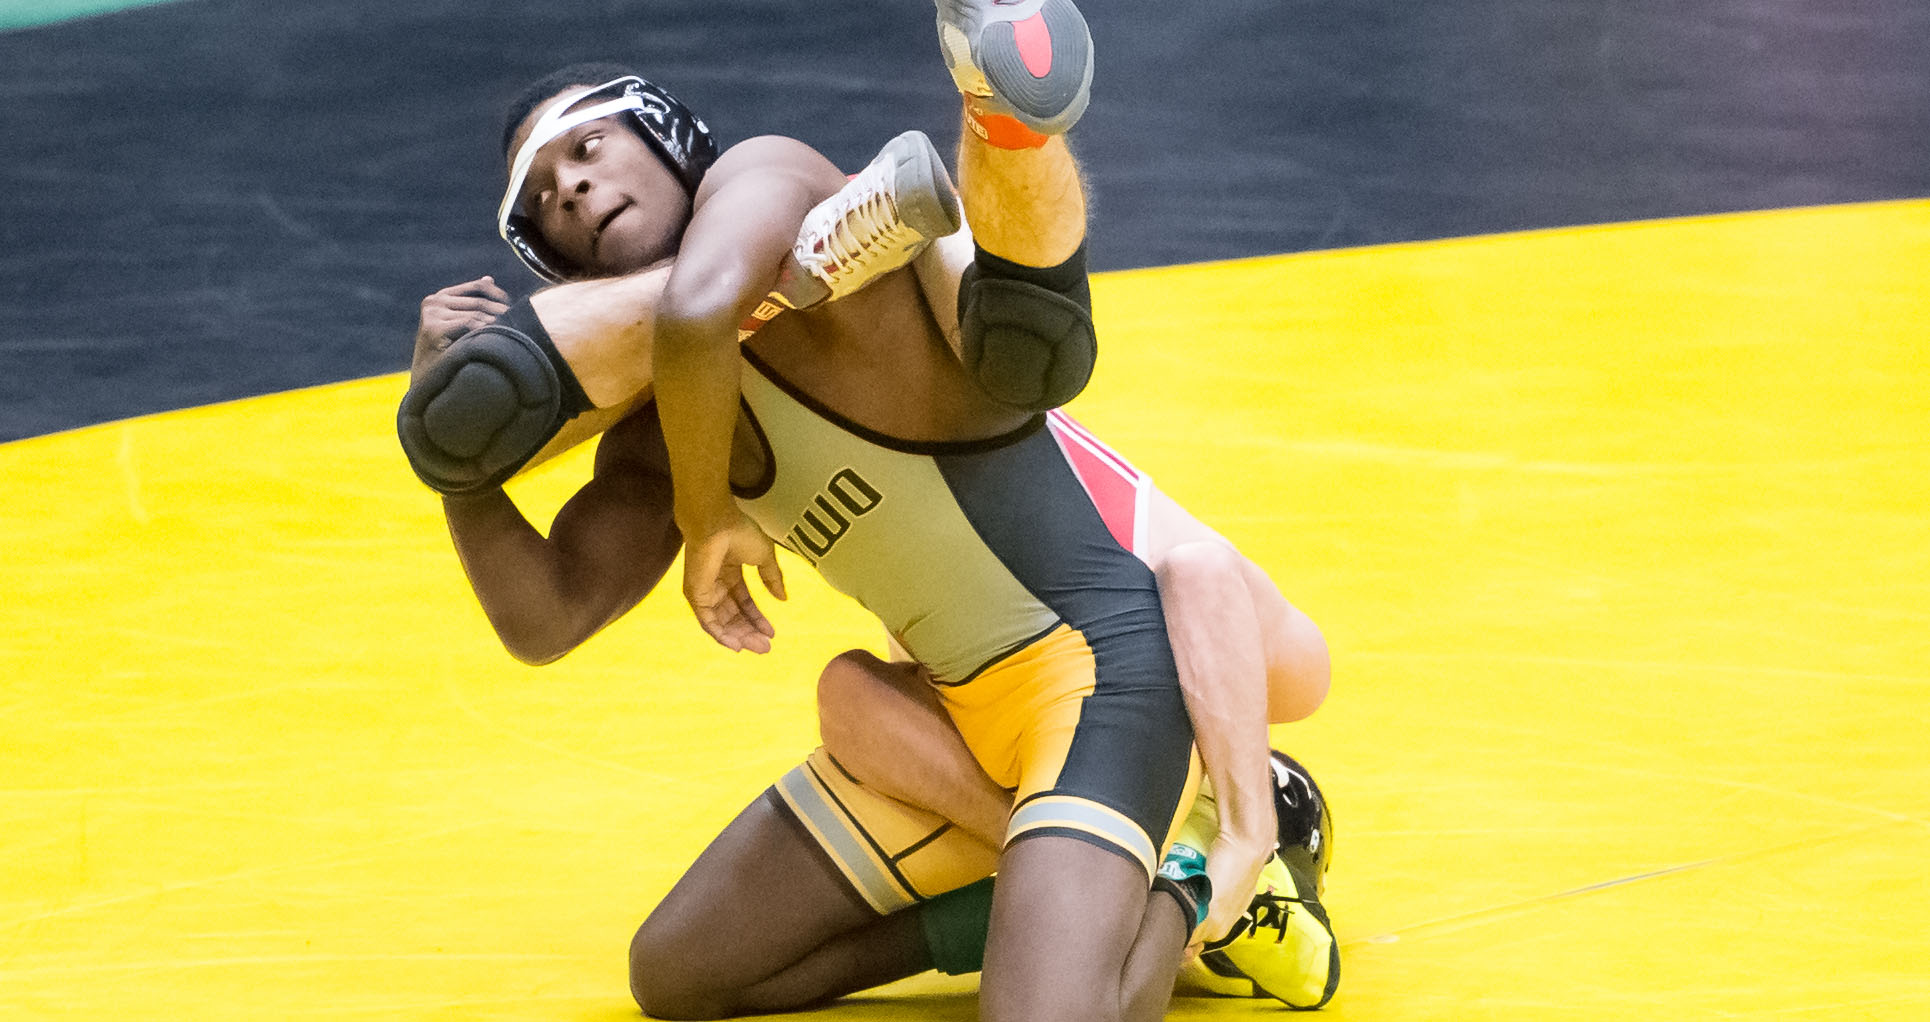 Jaylin Johnson's first collegiate victory was a pin over the Raiders' Mark Niewierowski in 2:35.